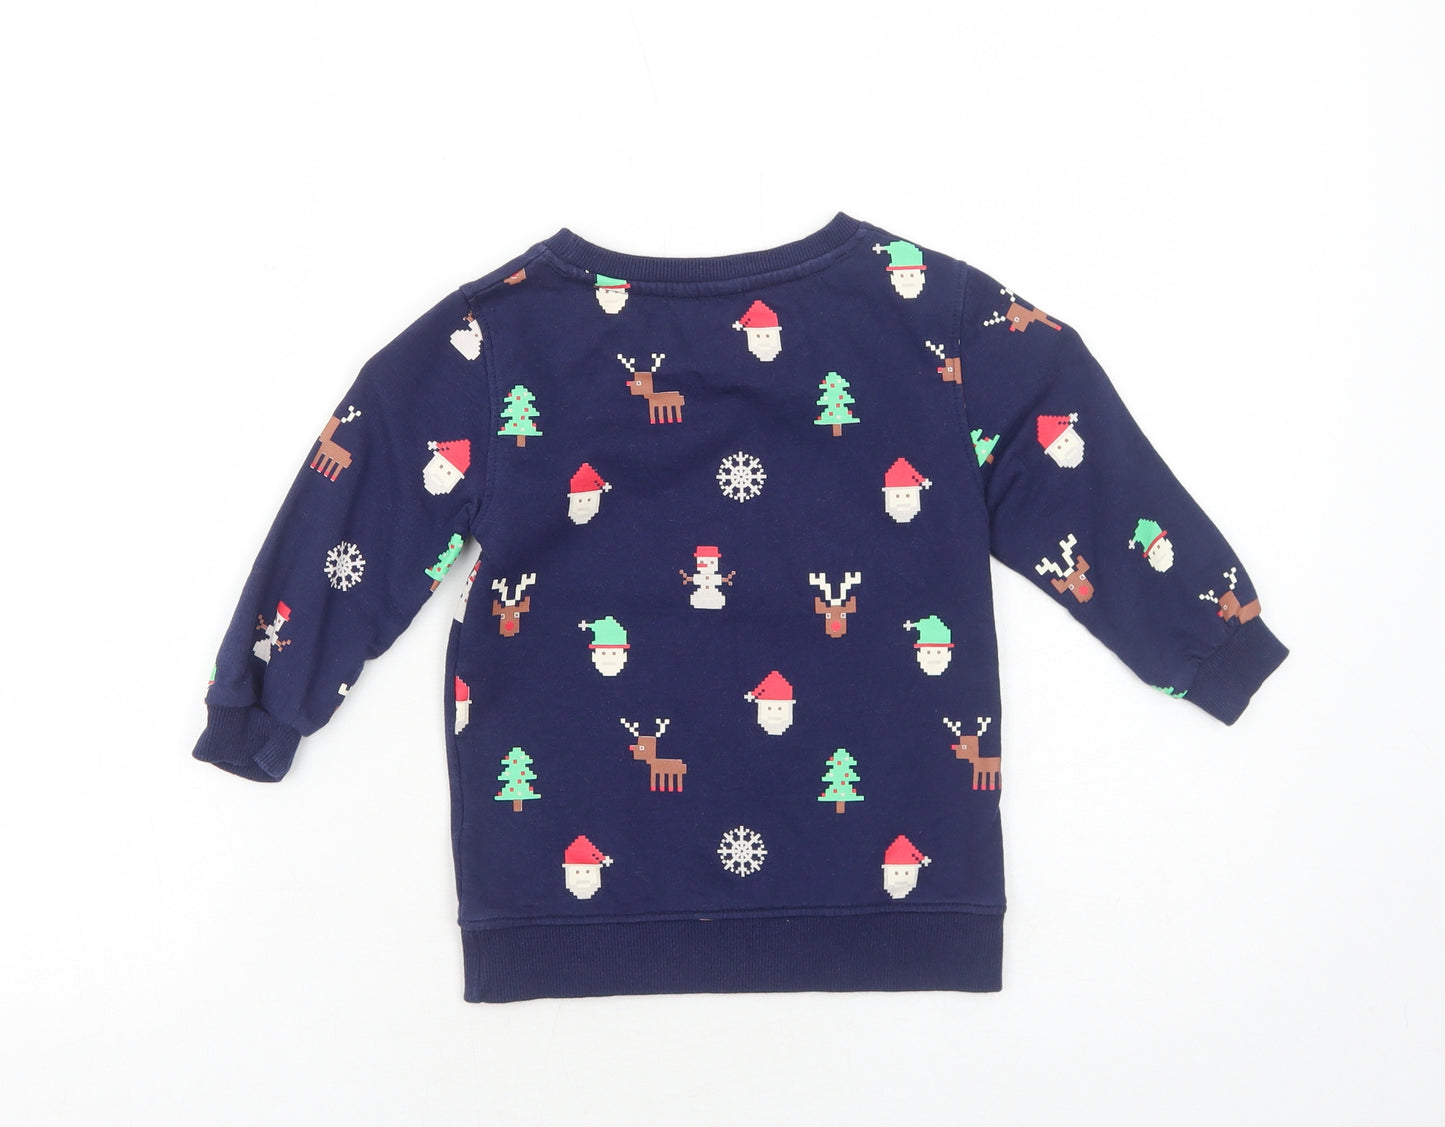 M&Co Boys Blue Geometric Cotton Pullover Sweatshirt Size 3-4 Years Pullover - Christmas